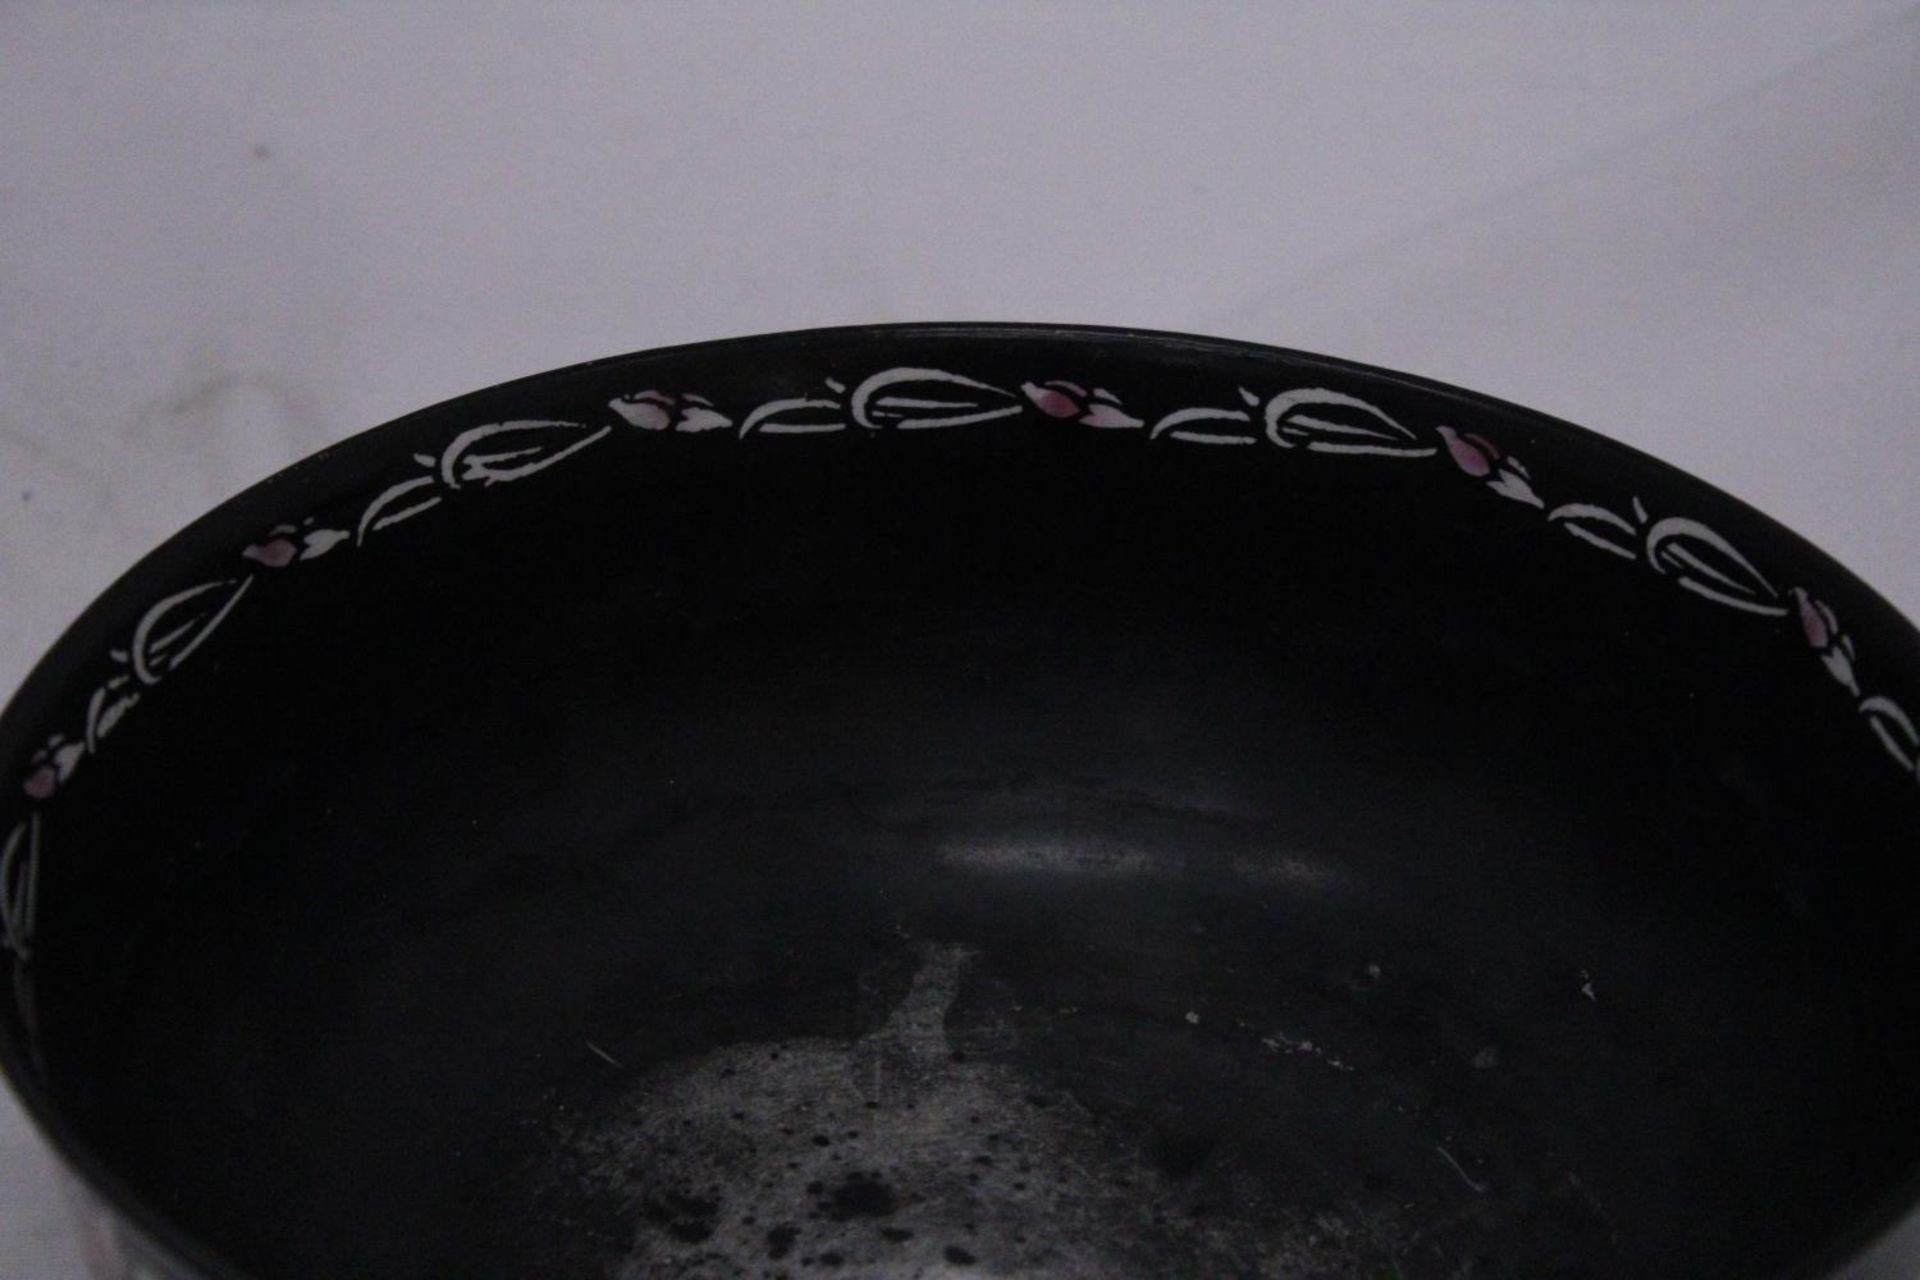 A VINTAGE SHELLEY BOWL, BLACK WITH FLORAL PATTERN, DIAMETER 24CM, SOME PAINTED RUBBED OFF FROM THE - Image 3 of 4